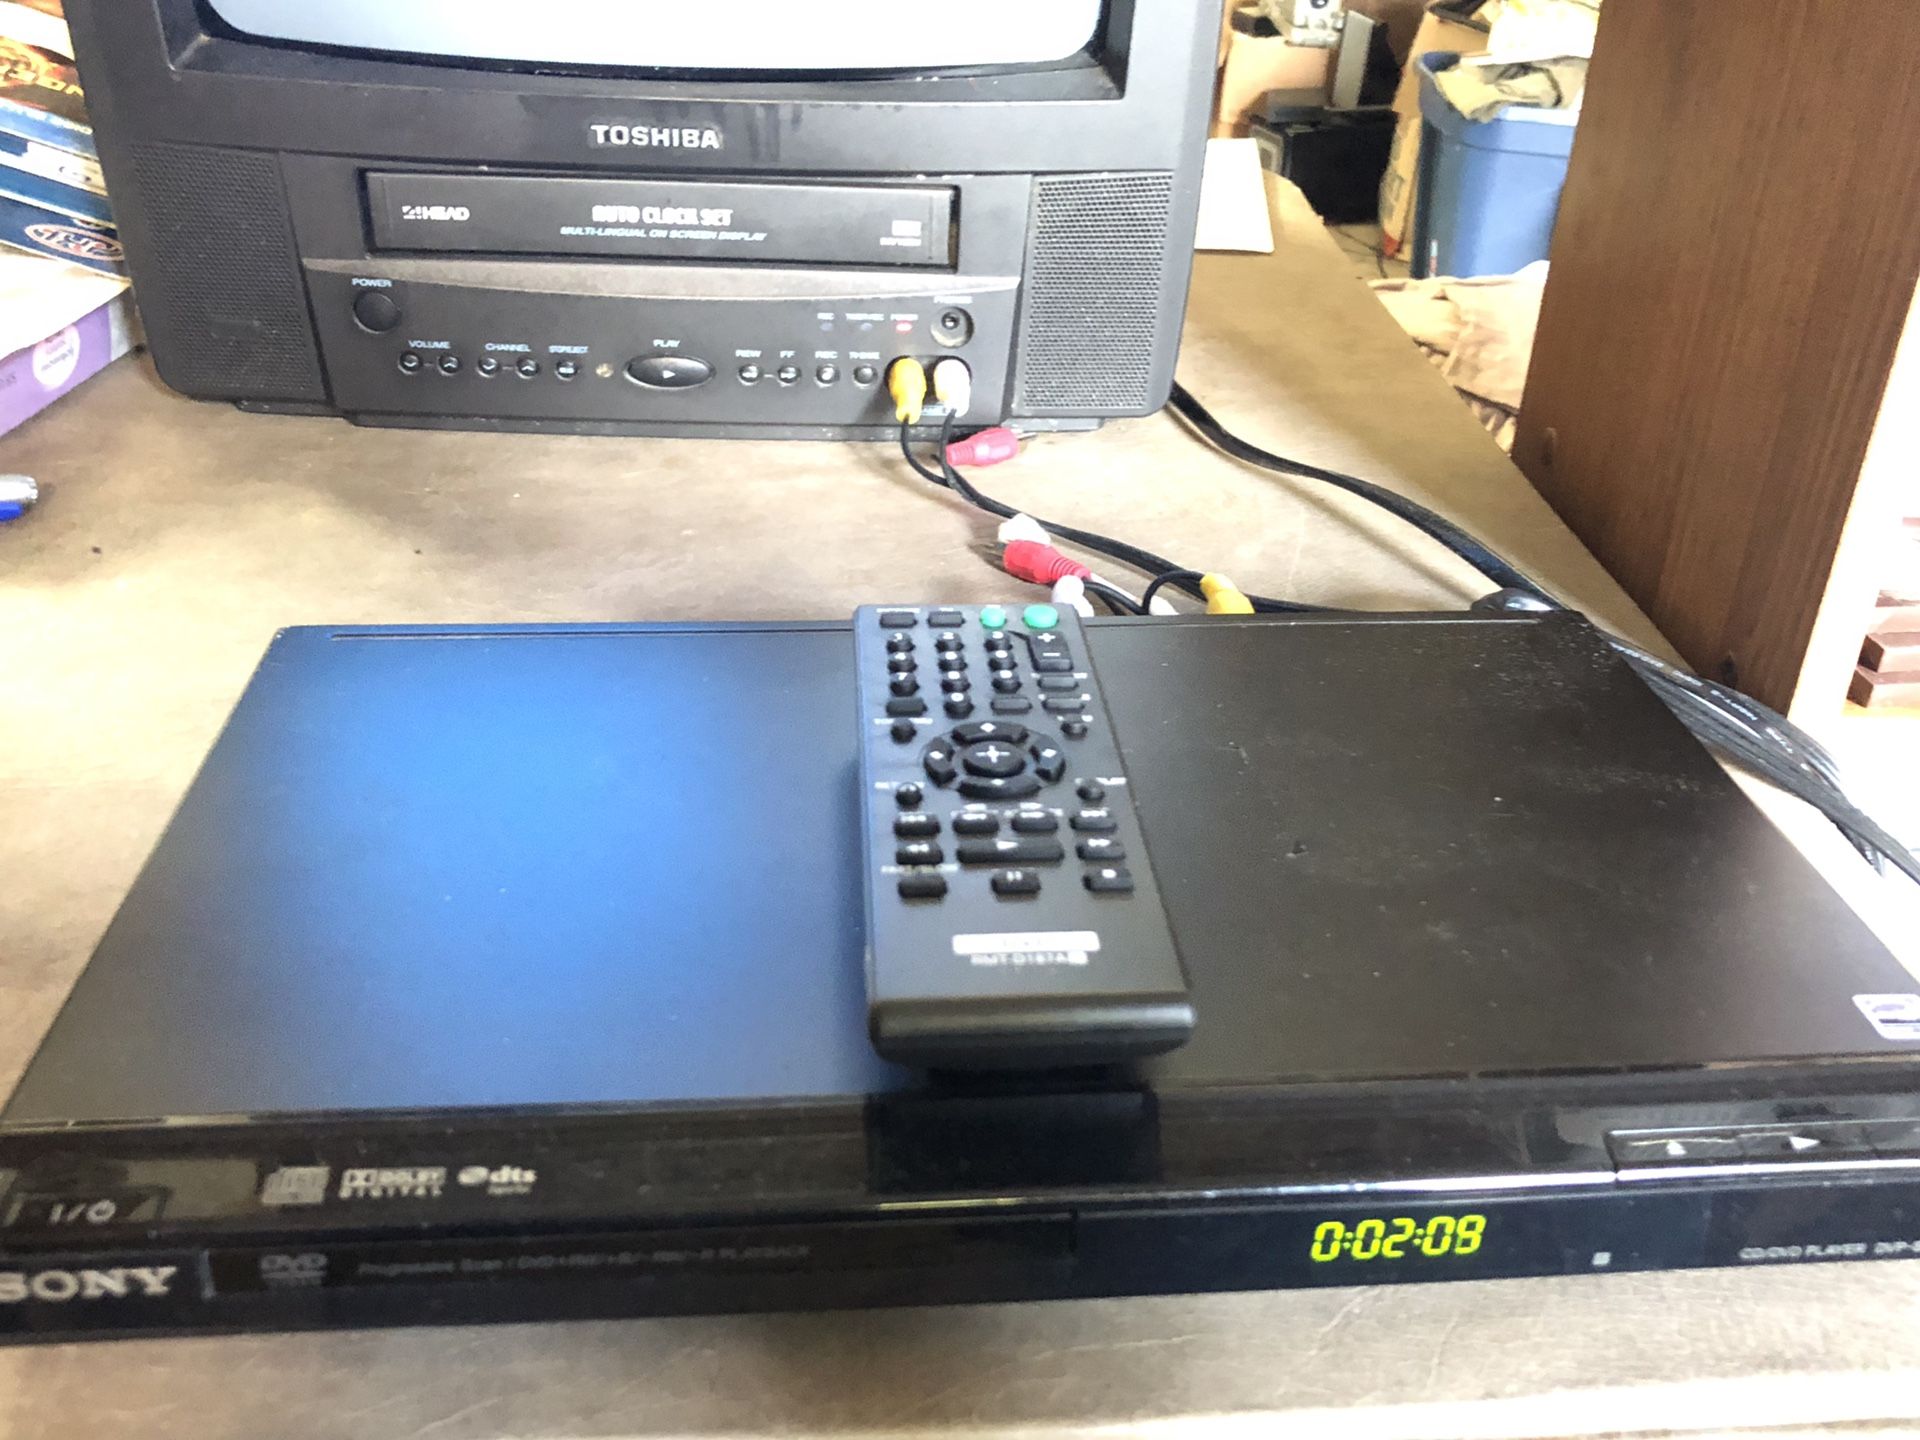 Sony DVD/CD player with new remote